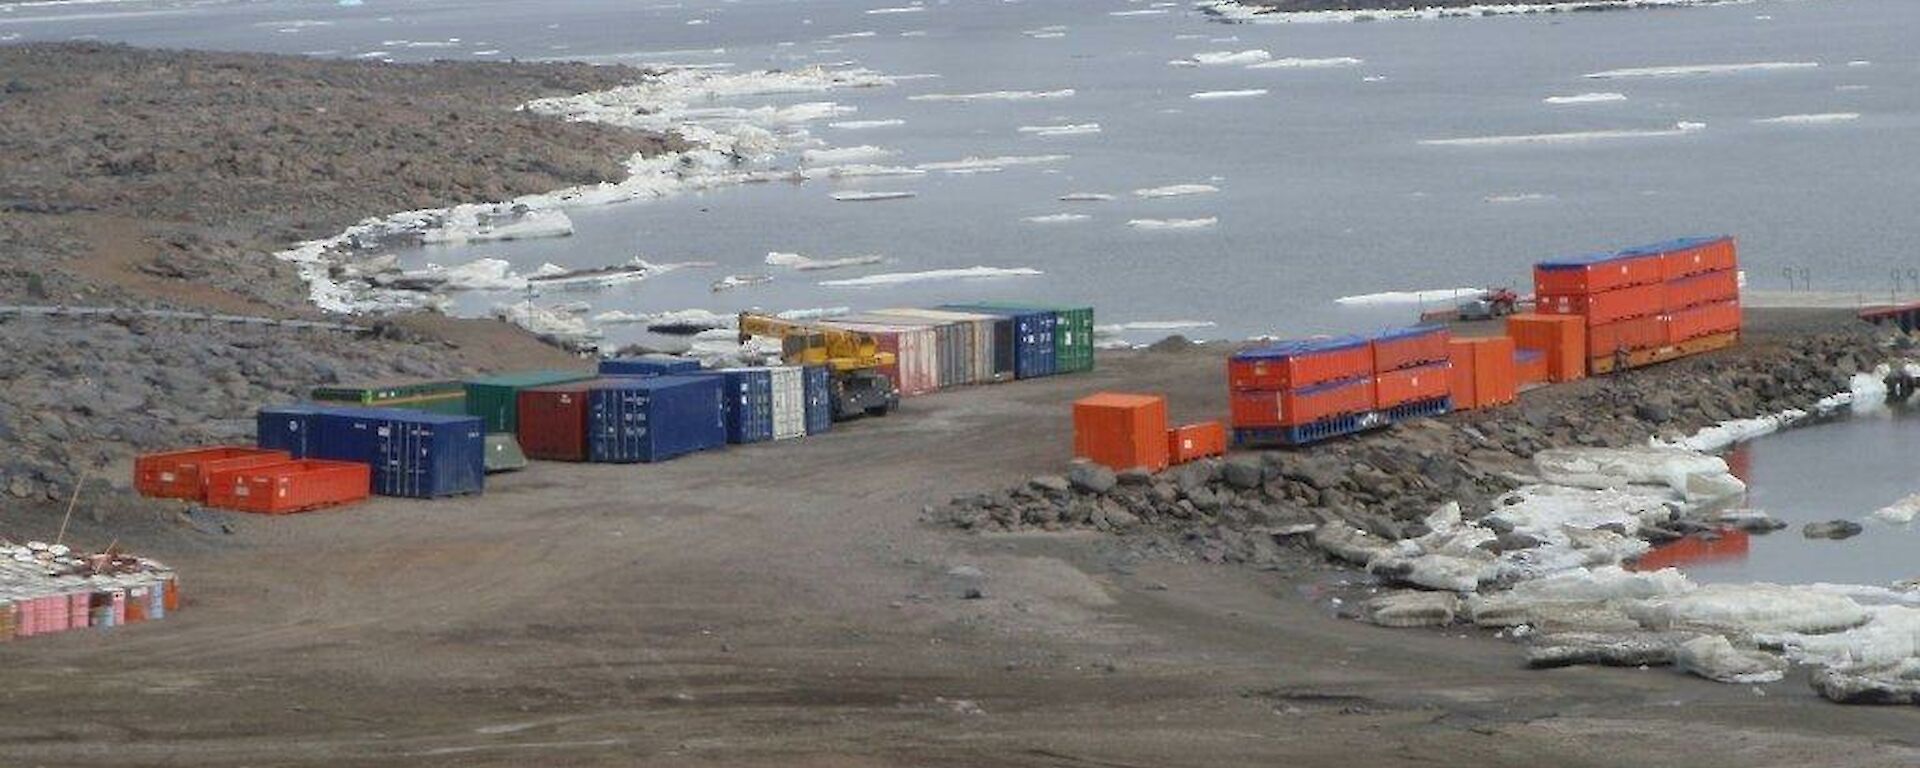 A photo of containers stacked ready for return to Australia on the Davis wharf